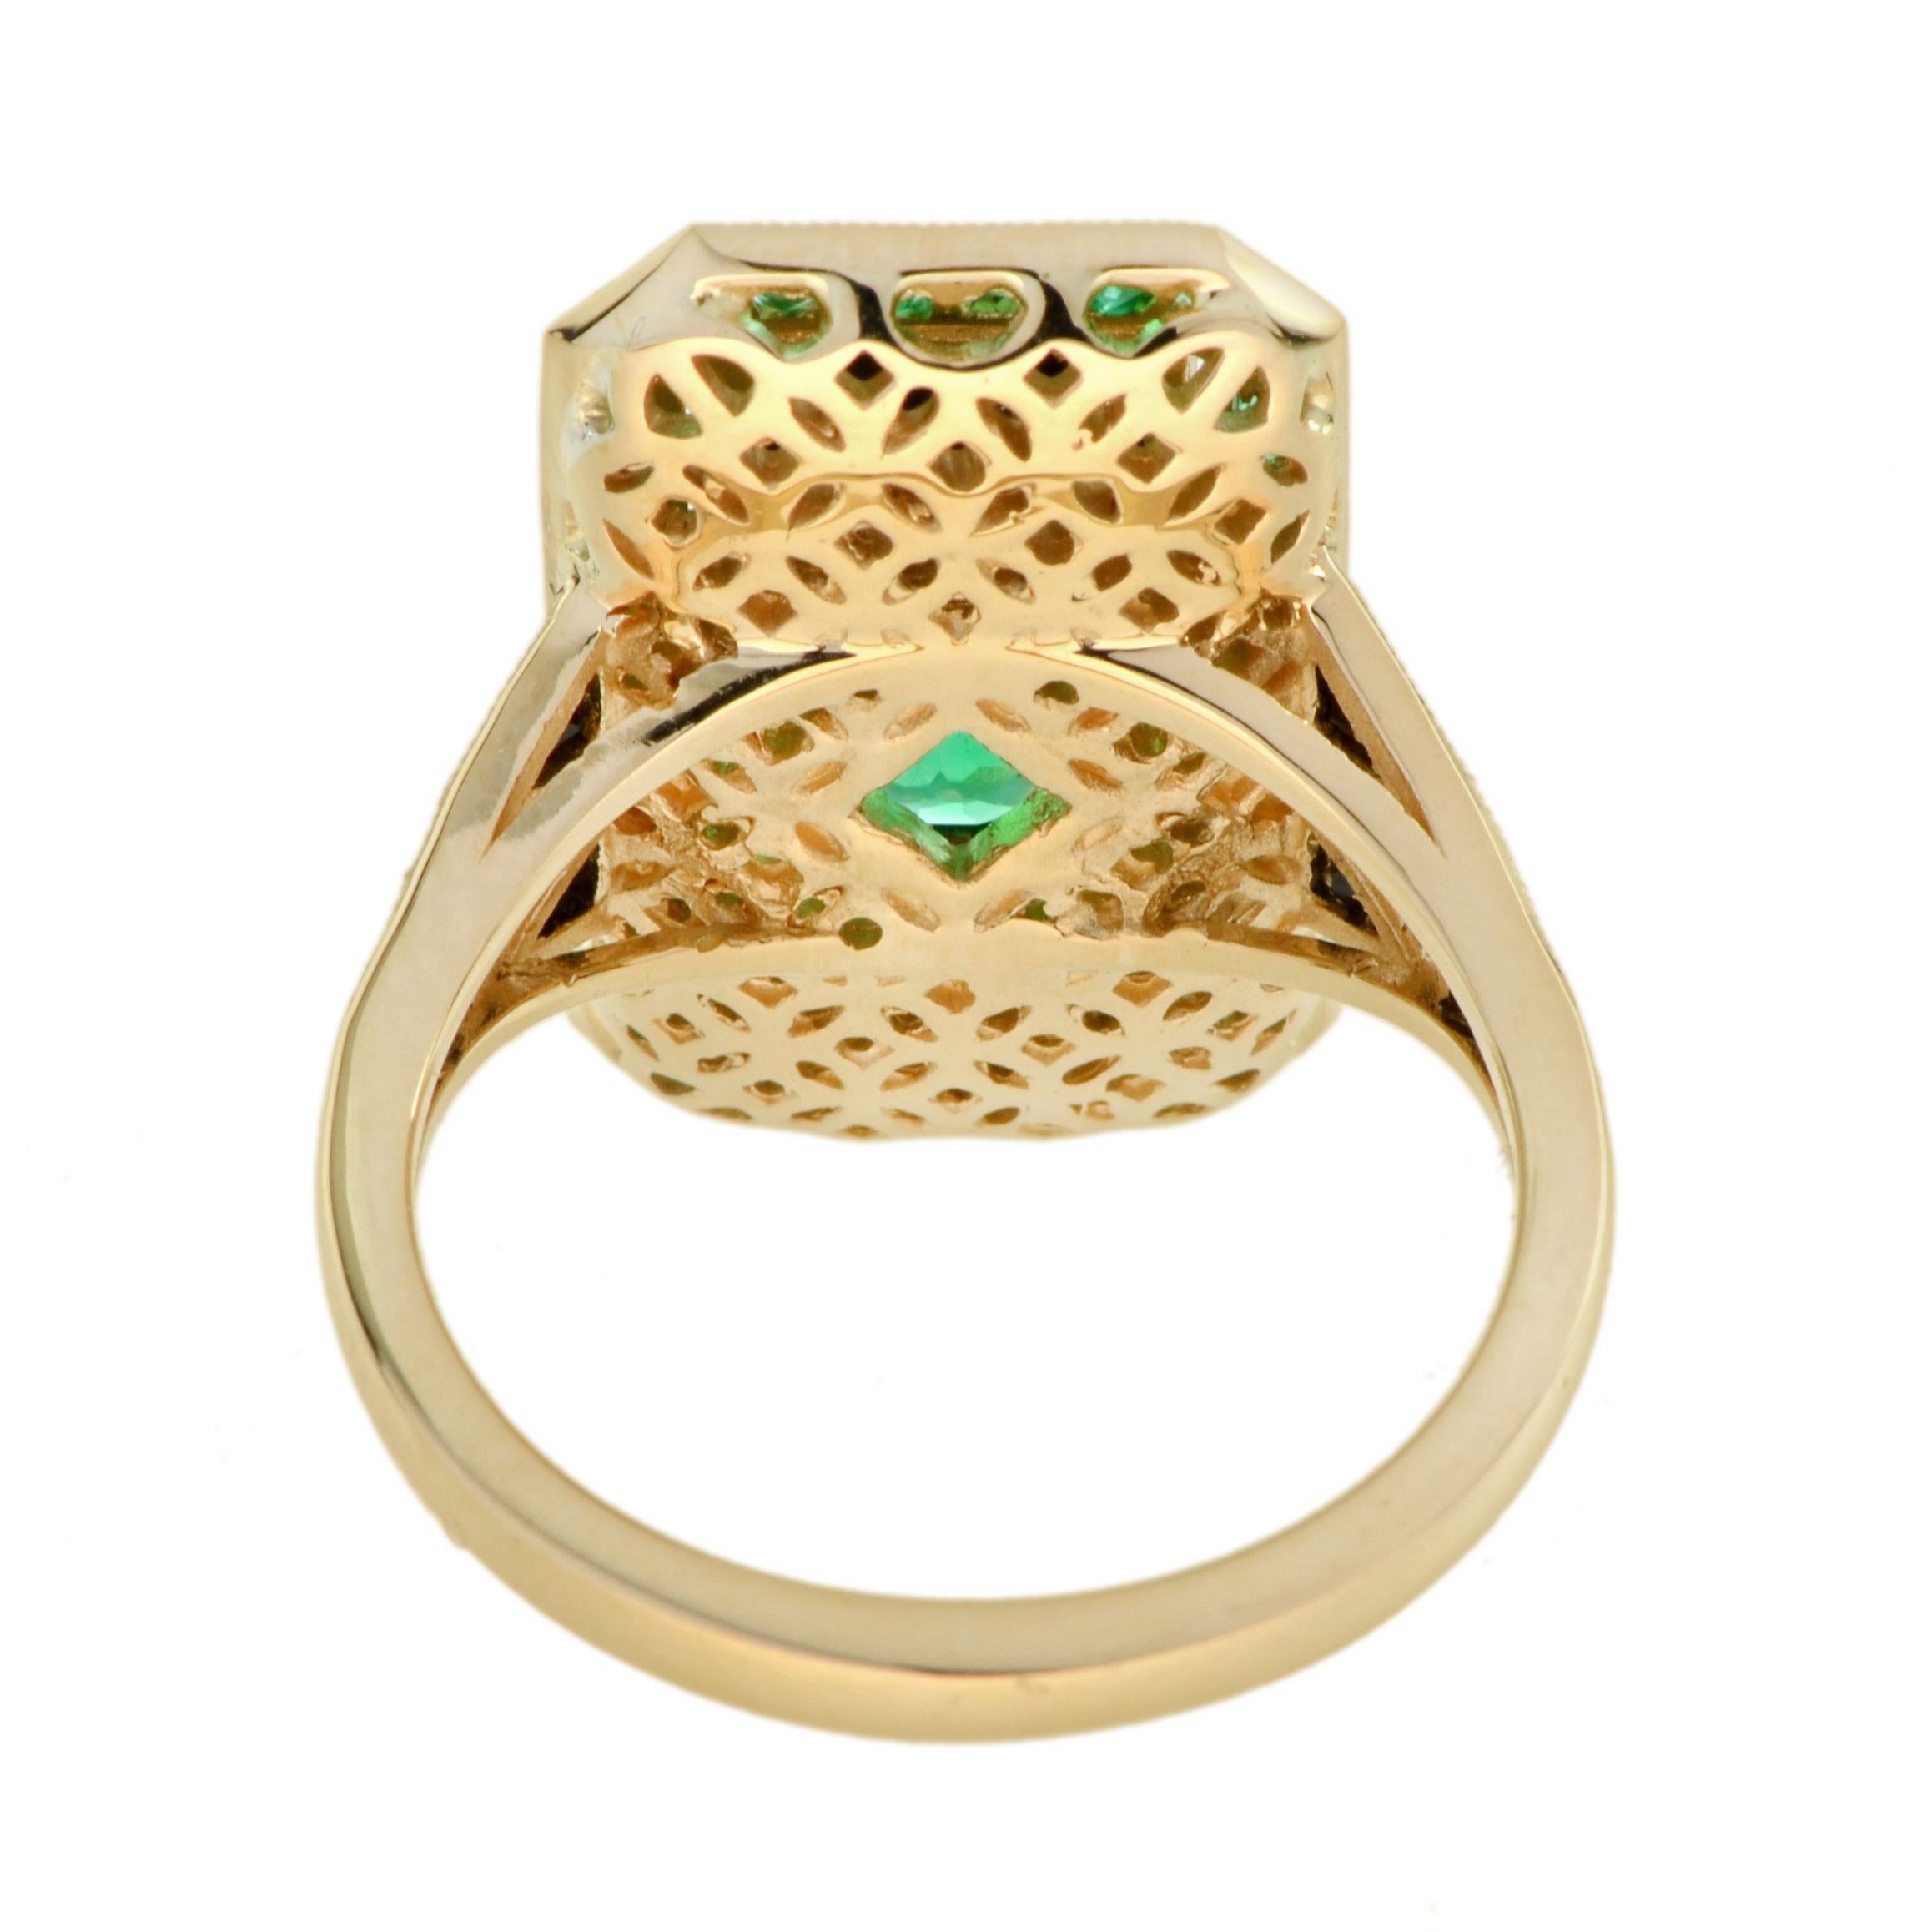 Emerald and Onyx Art Deco Style Ring in 18k Yellow Gold 1